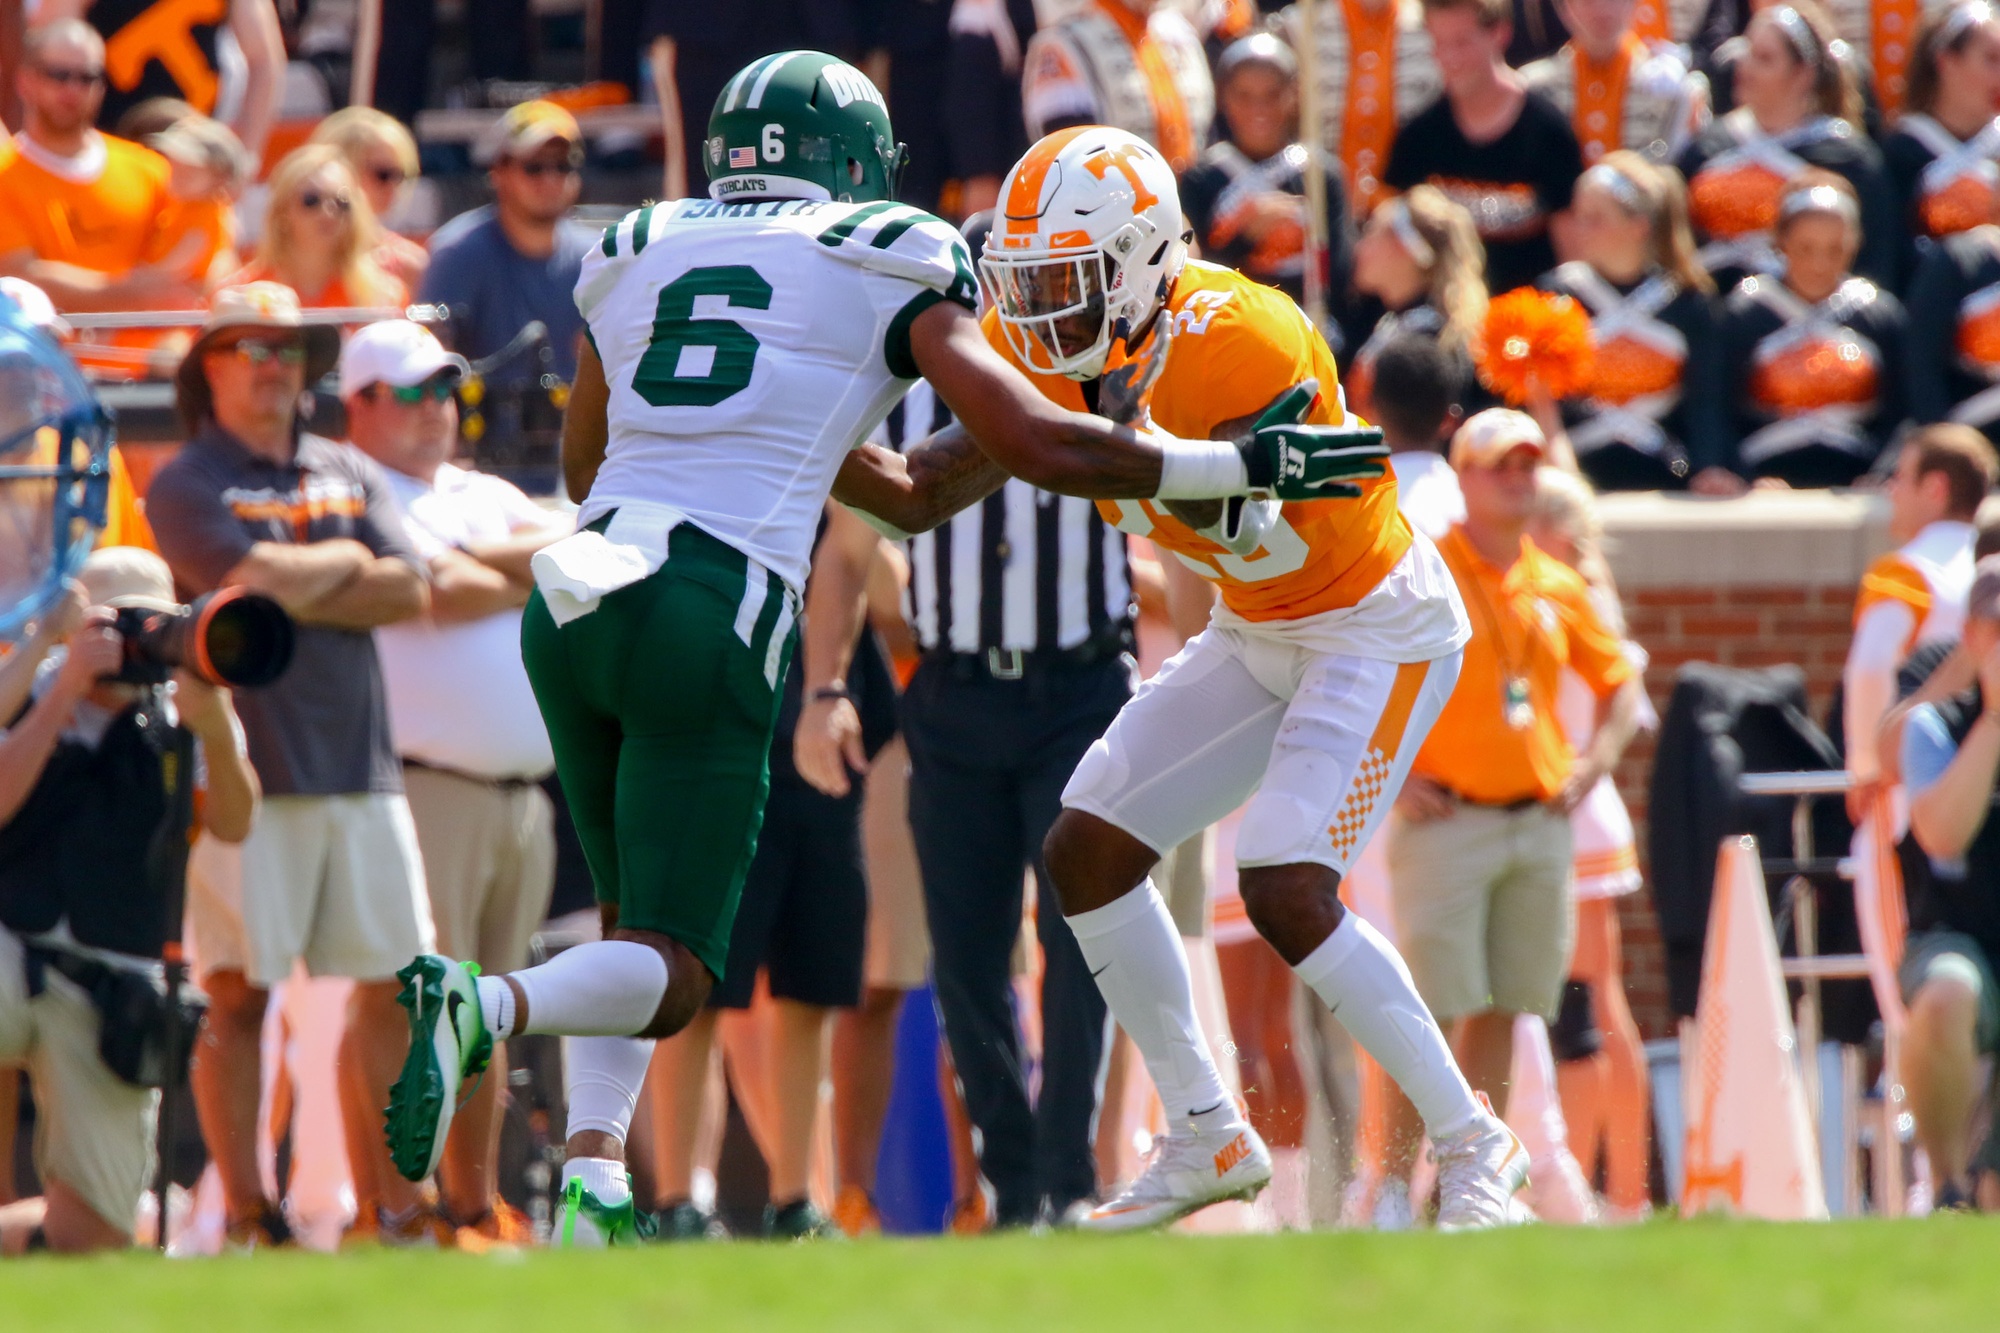 Sep 17, 2016; Knoxville, TN, USA; Ohio Bobcats wide receiver Sebastian Smith (6) and Tennessee Volunteers defensive back Cameron Sutton (23) during the first quarter at Neyland Stadium. Mandatory Credit: Randy Sartin-USA TODAY Sports